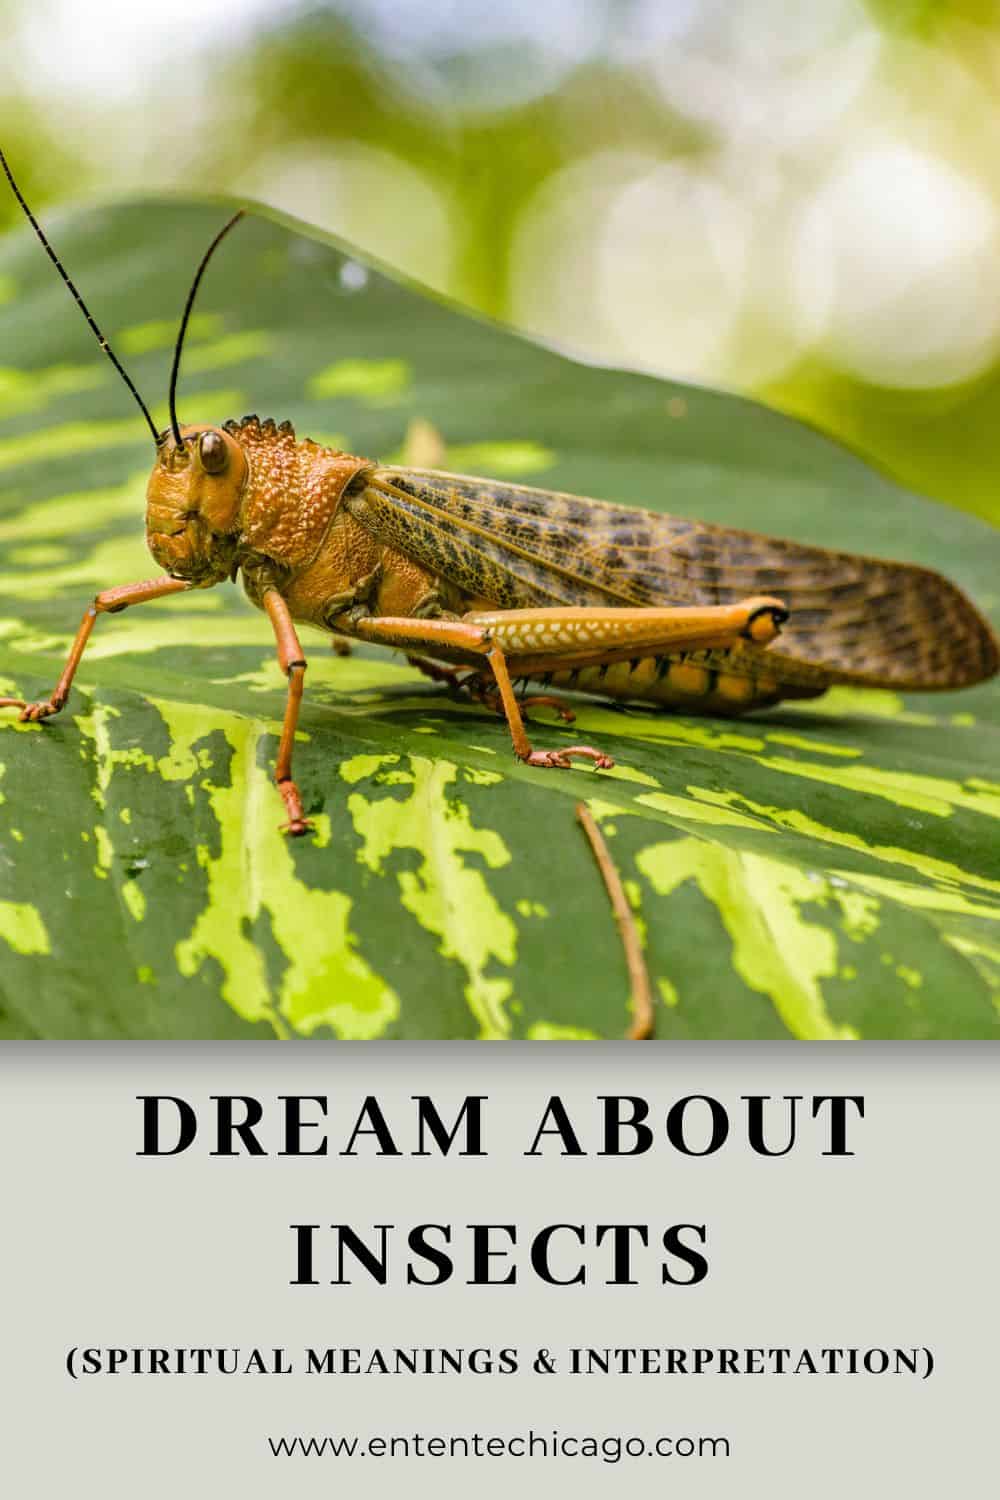 12 meanings to insects in your dreams